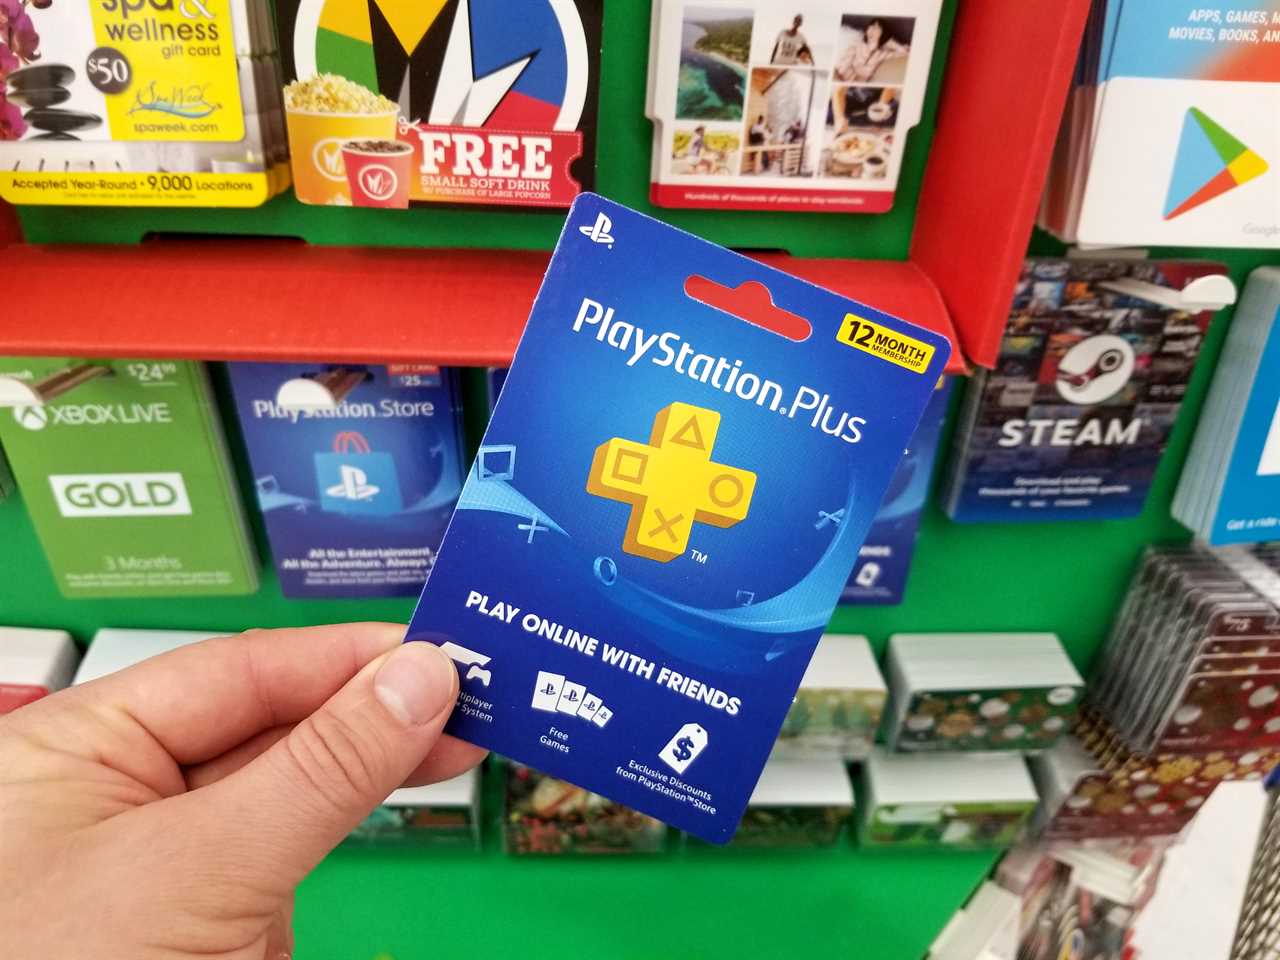 Where to buy a PlayStation gift card and which shops sell them?